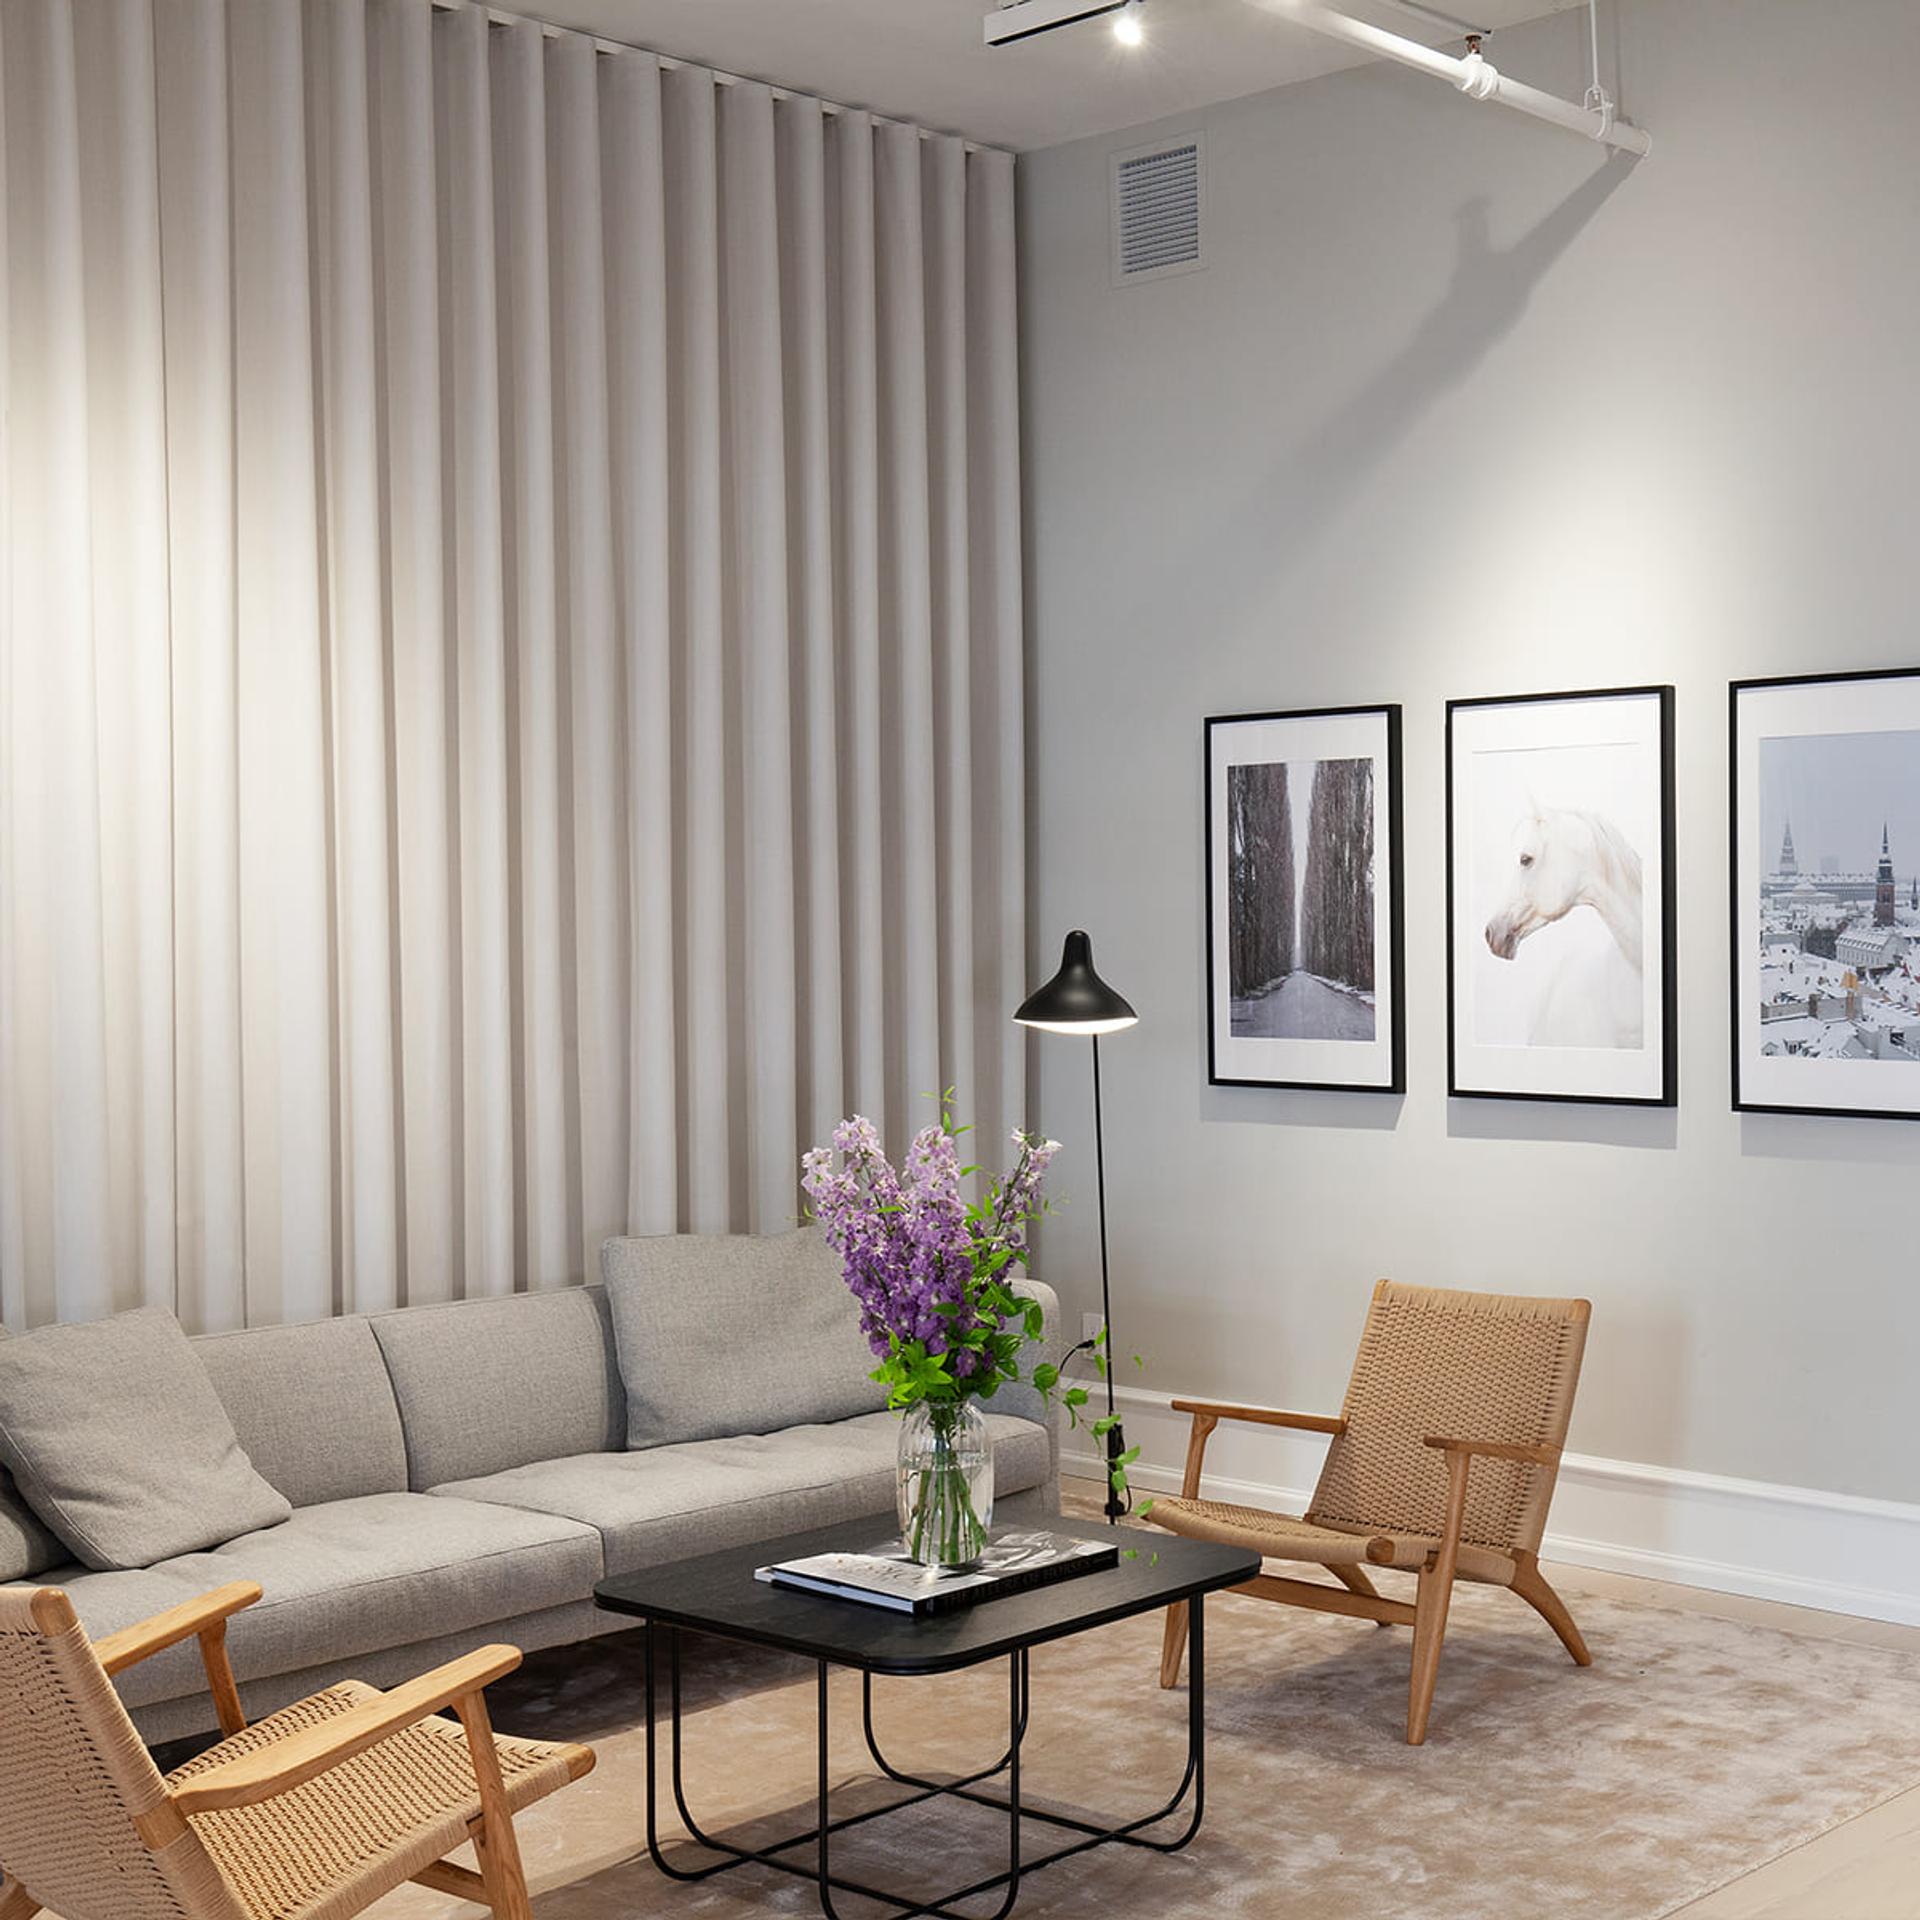 Photo of the Harklinikken New York Clinic waiting room sofa with table and chairs